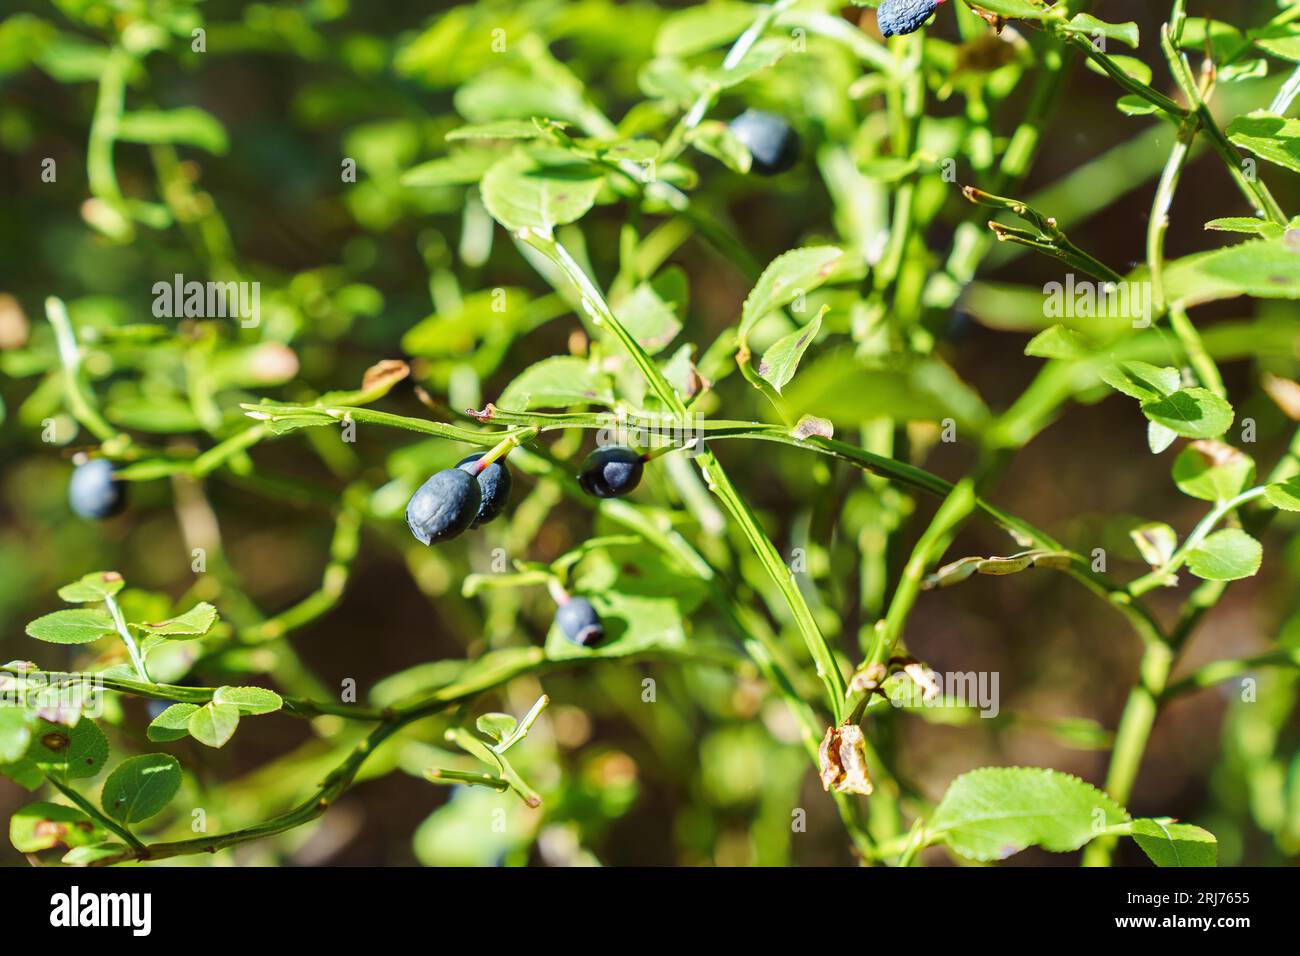 Bush with wild blueberries in sunlight Stock Photo